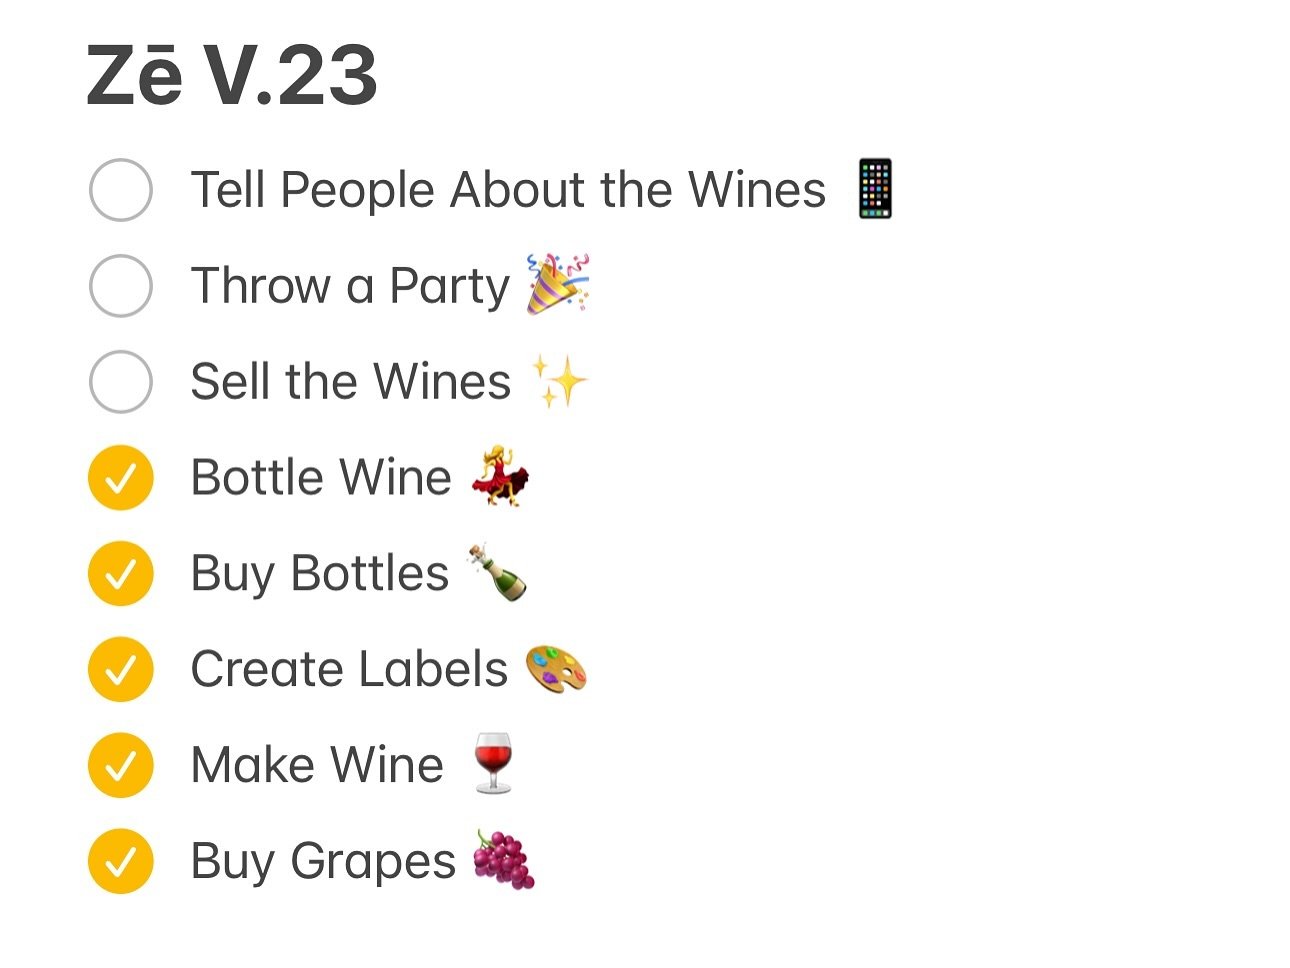 Am I missing anything? Oh yeah&hellip; It&rsquo;s about time to release some new wines!

The 2023 wines are almost ready for their big day, so get ready to grab some new tasty things. What are you excited to try? Check out the hints in the poll 🔍